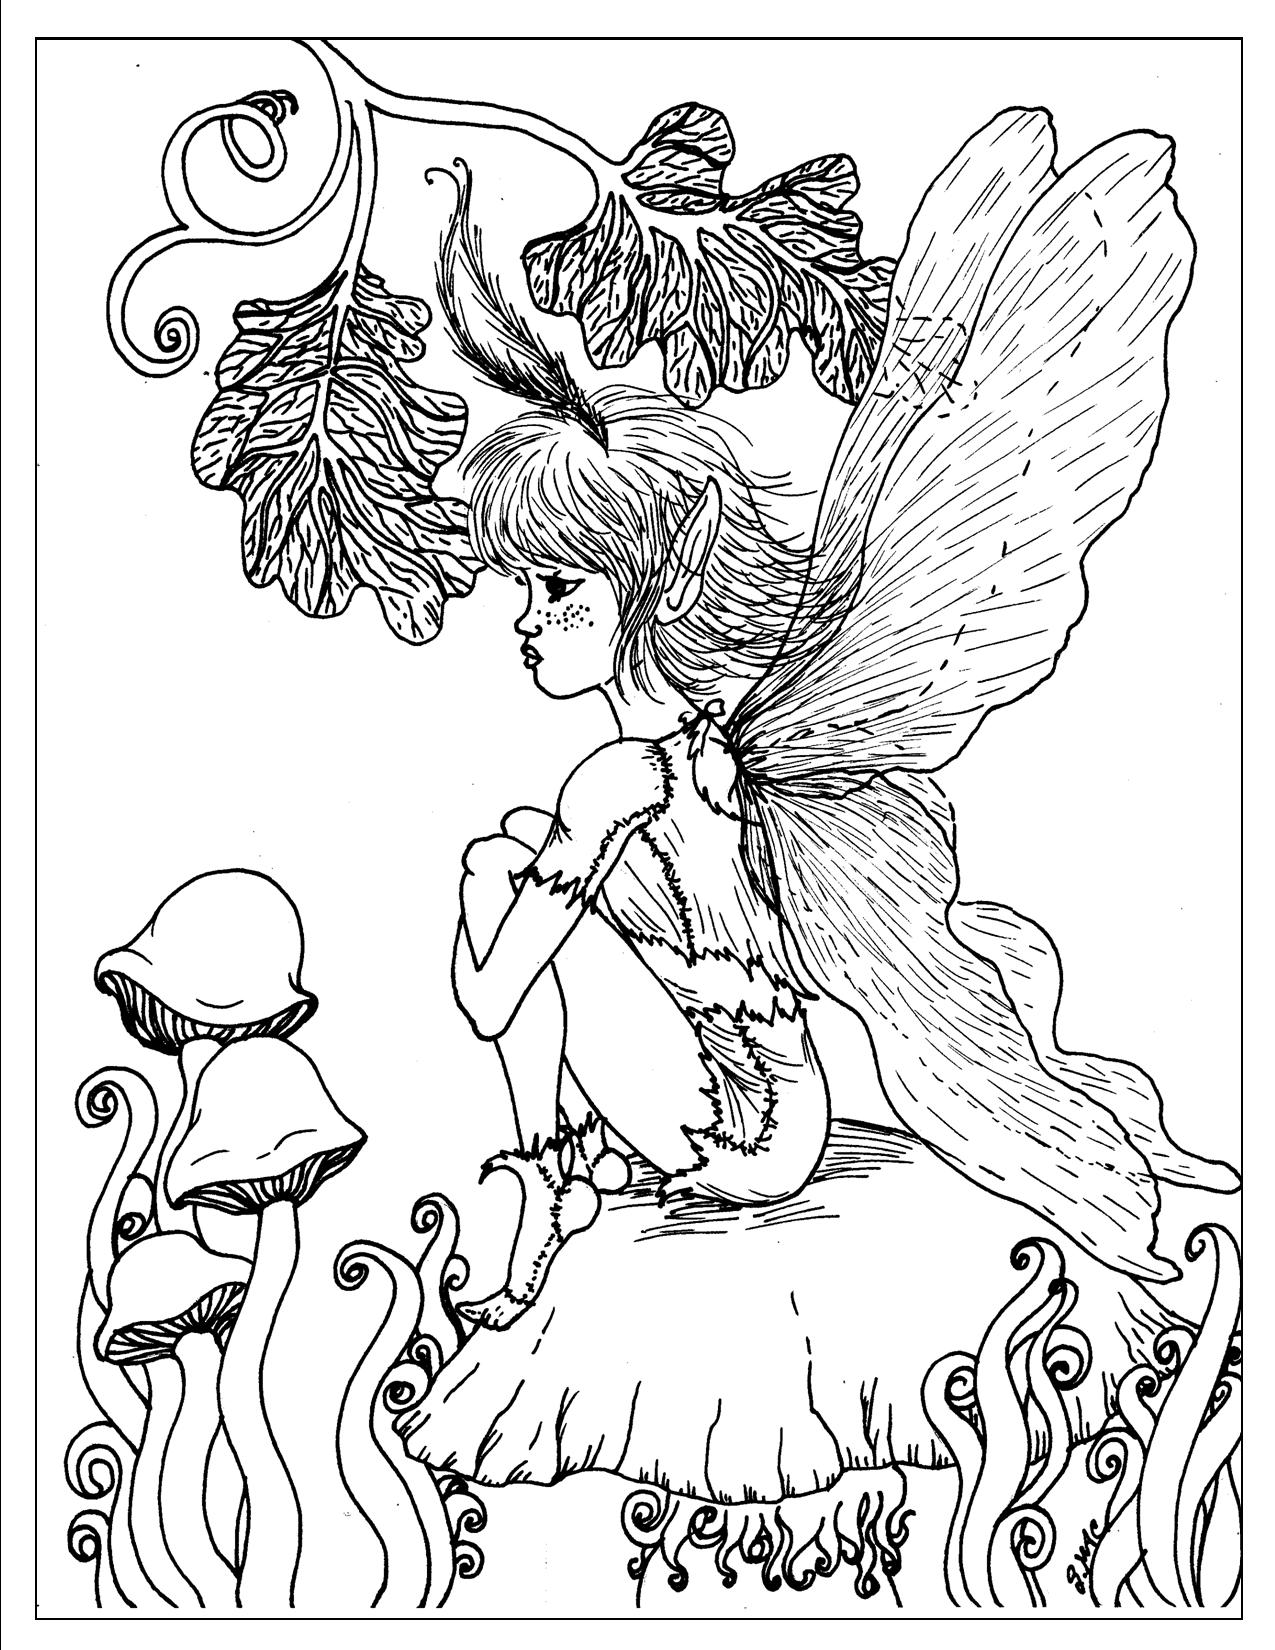 Fantasy Coloring Pages | S.Macs Place to Be